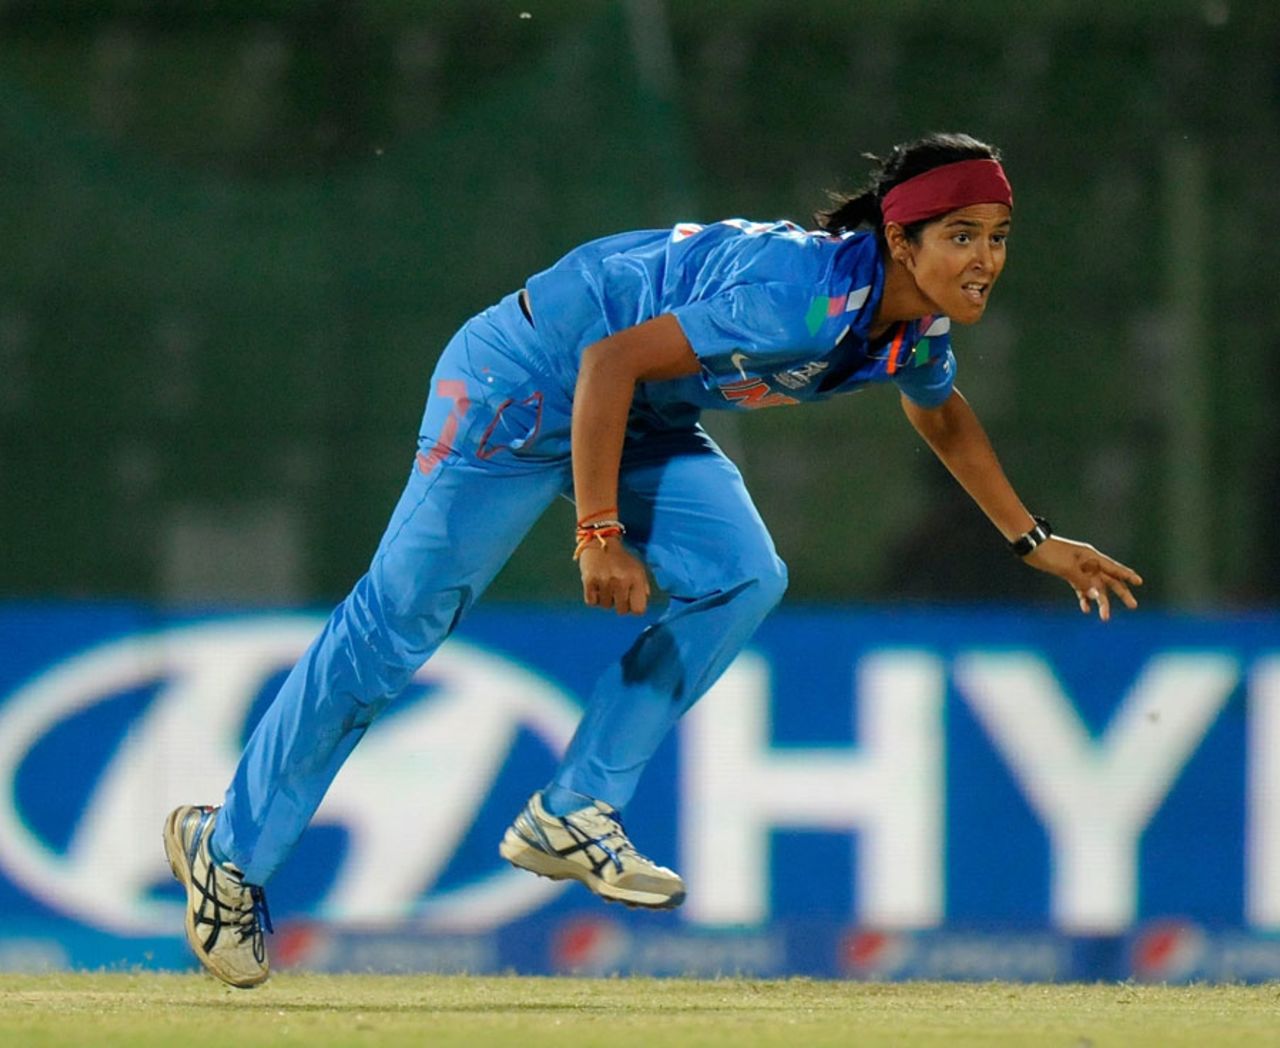 India's Shubhlakshmi Sharma after delivering the ball, India v Pakistan, Women's World T20, WT20 2016 Qualification Playoff, Sylhet, April 2, 2014